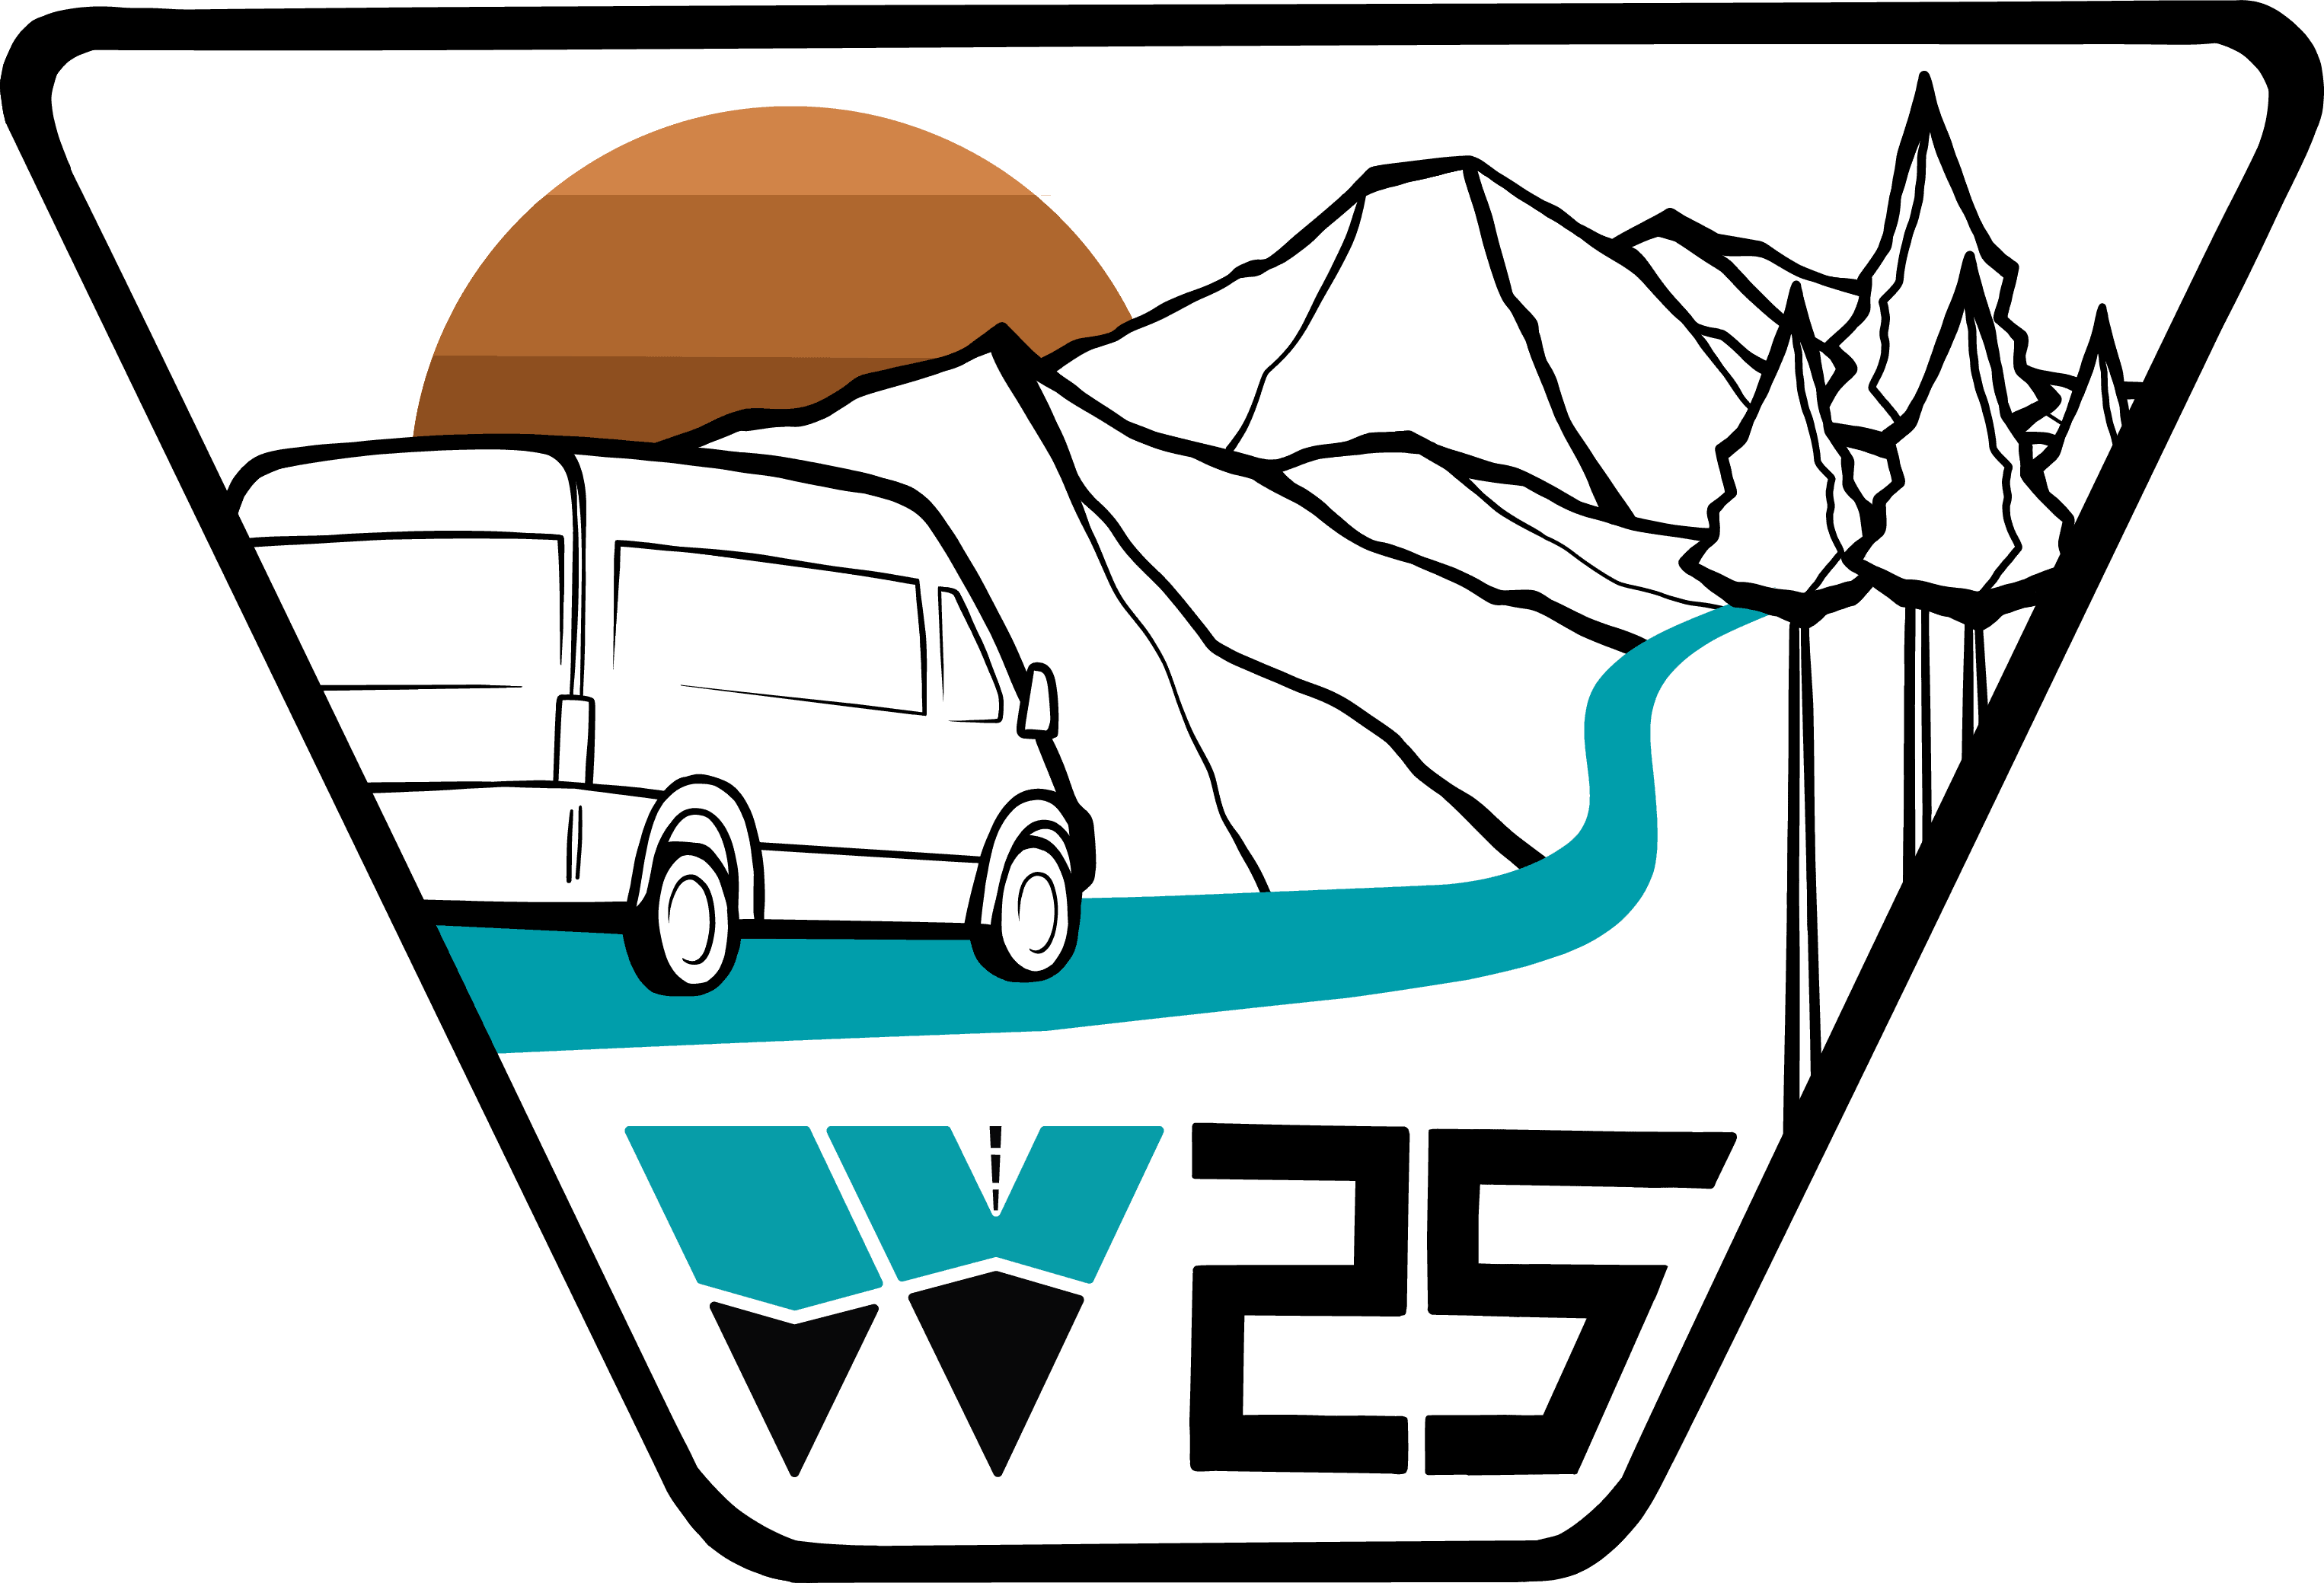 Wayfarer 25 Patch - graphic of van set against mountains and trees with a bronze sun setting on the horizon